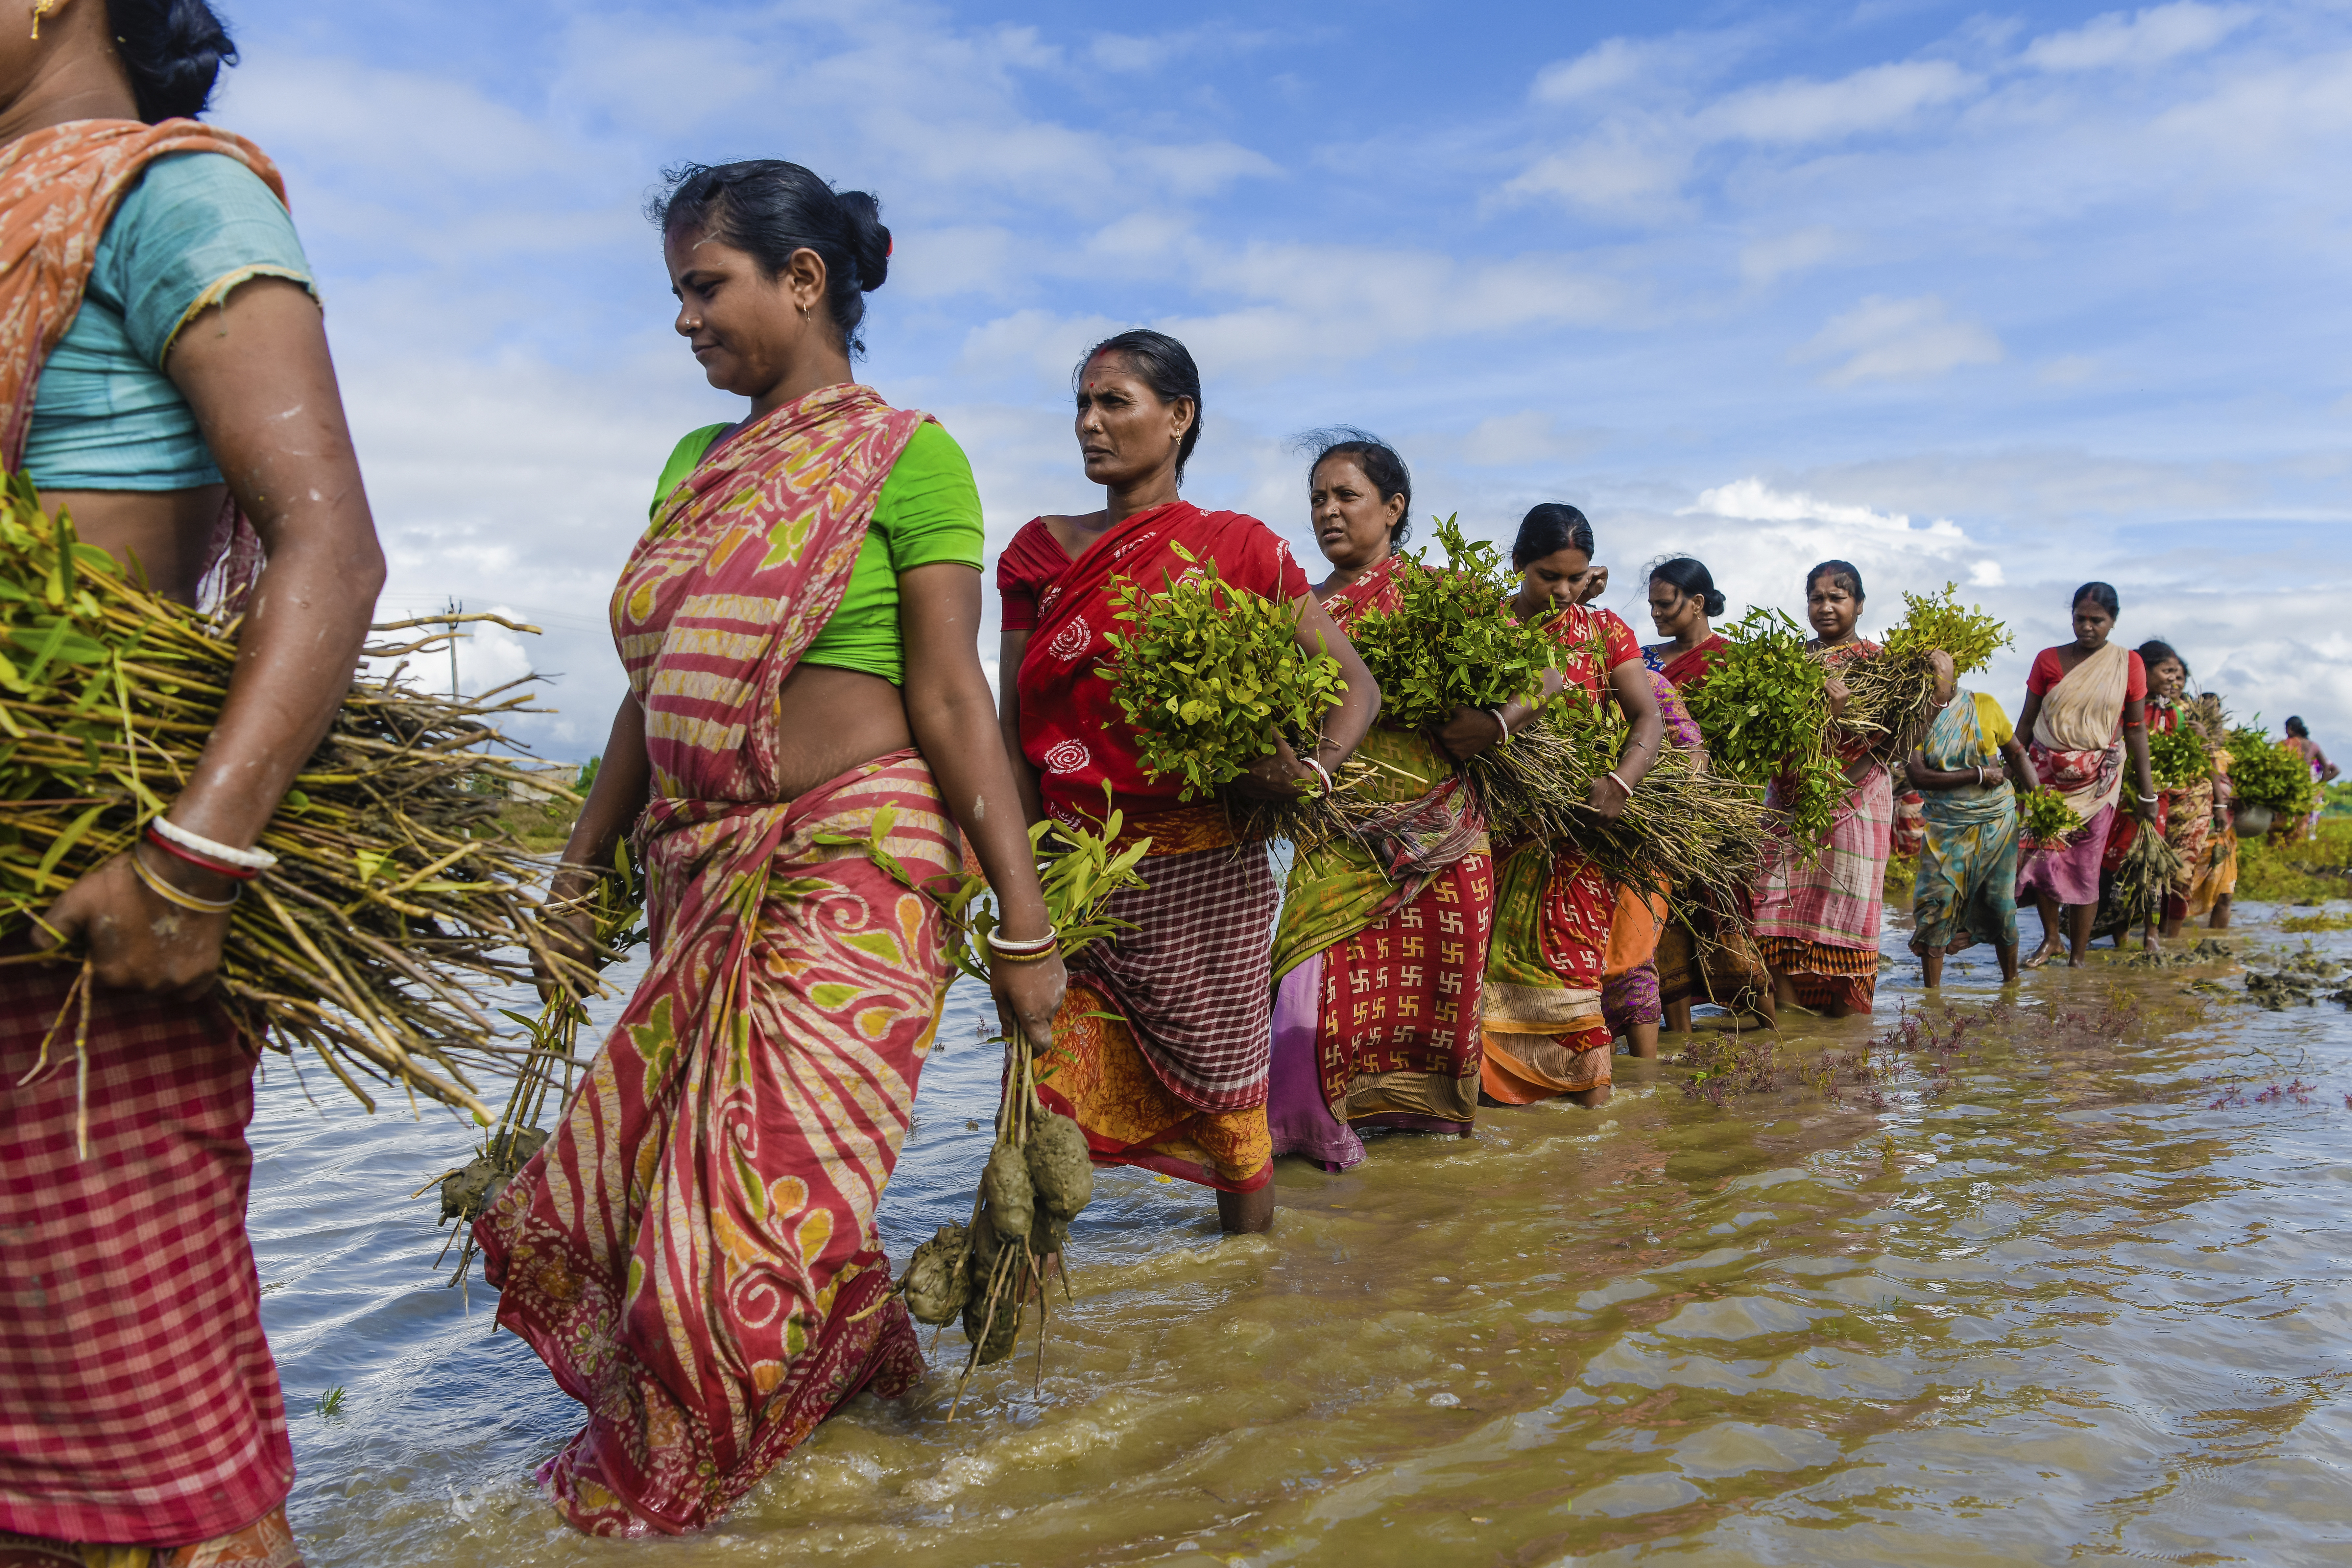 Women queue to plant mangrove saplings along the riverbanks of the Matla river in Sundarbans, India as part of efforts to combat the impacts of climate change. : Avijit Ghosh / Climate Visuals CC BY-NC-ND 4.0